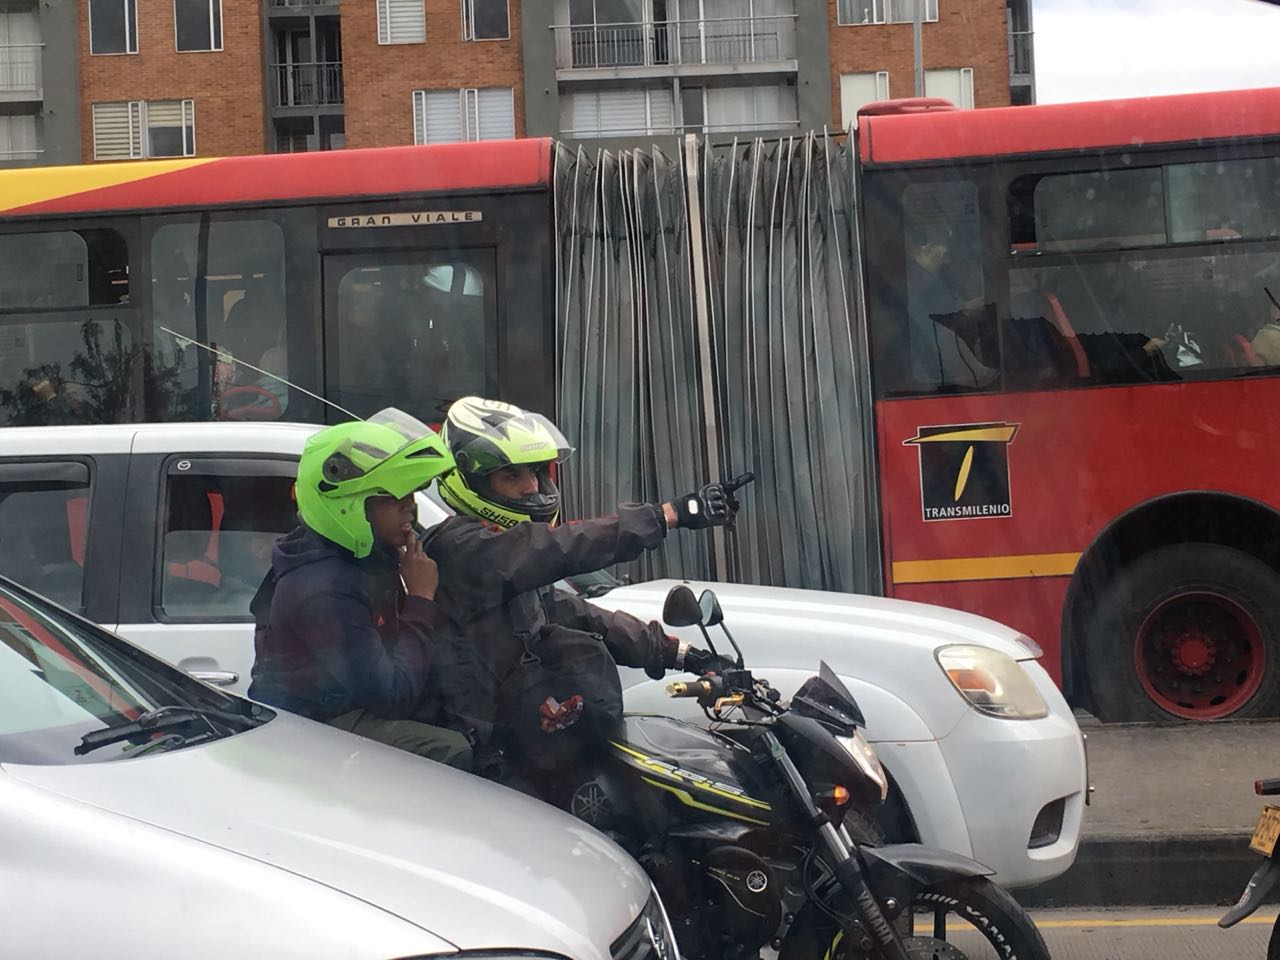 There will be a motorcycle barbecue restriction in Bogotá: what days and what time